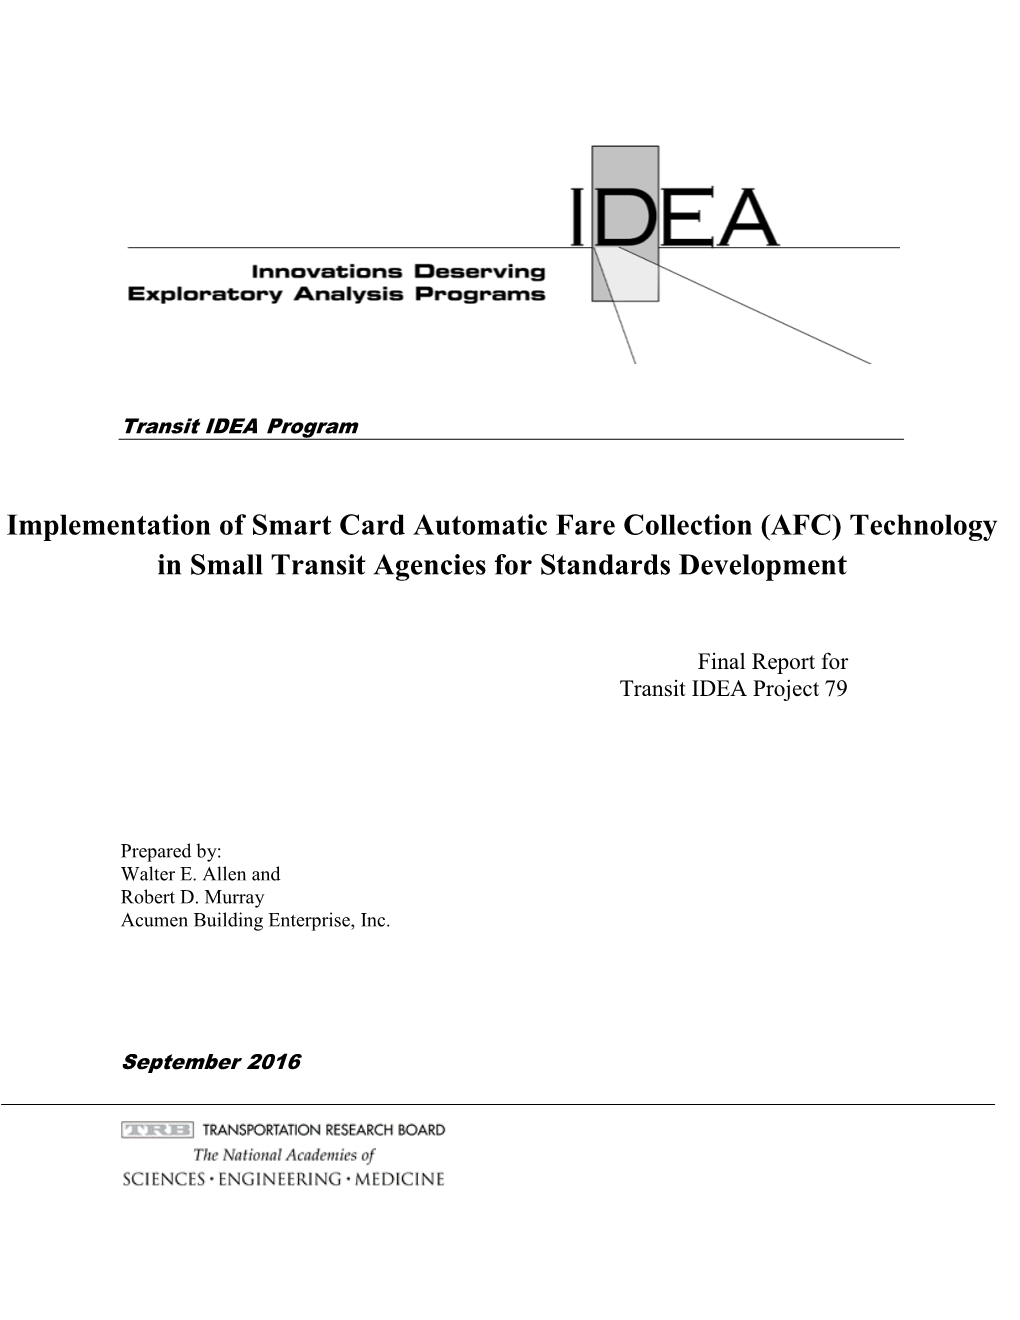 Implementation of Smart Card Automatic Fare Collection (AFC) Technology in Small Transit Agencies for Standards Development